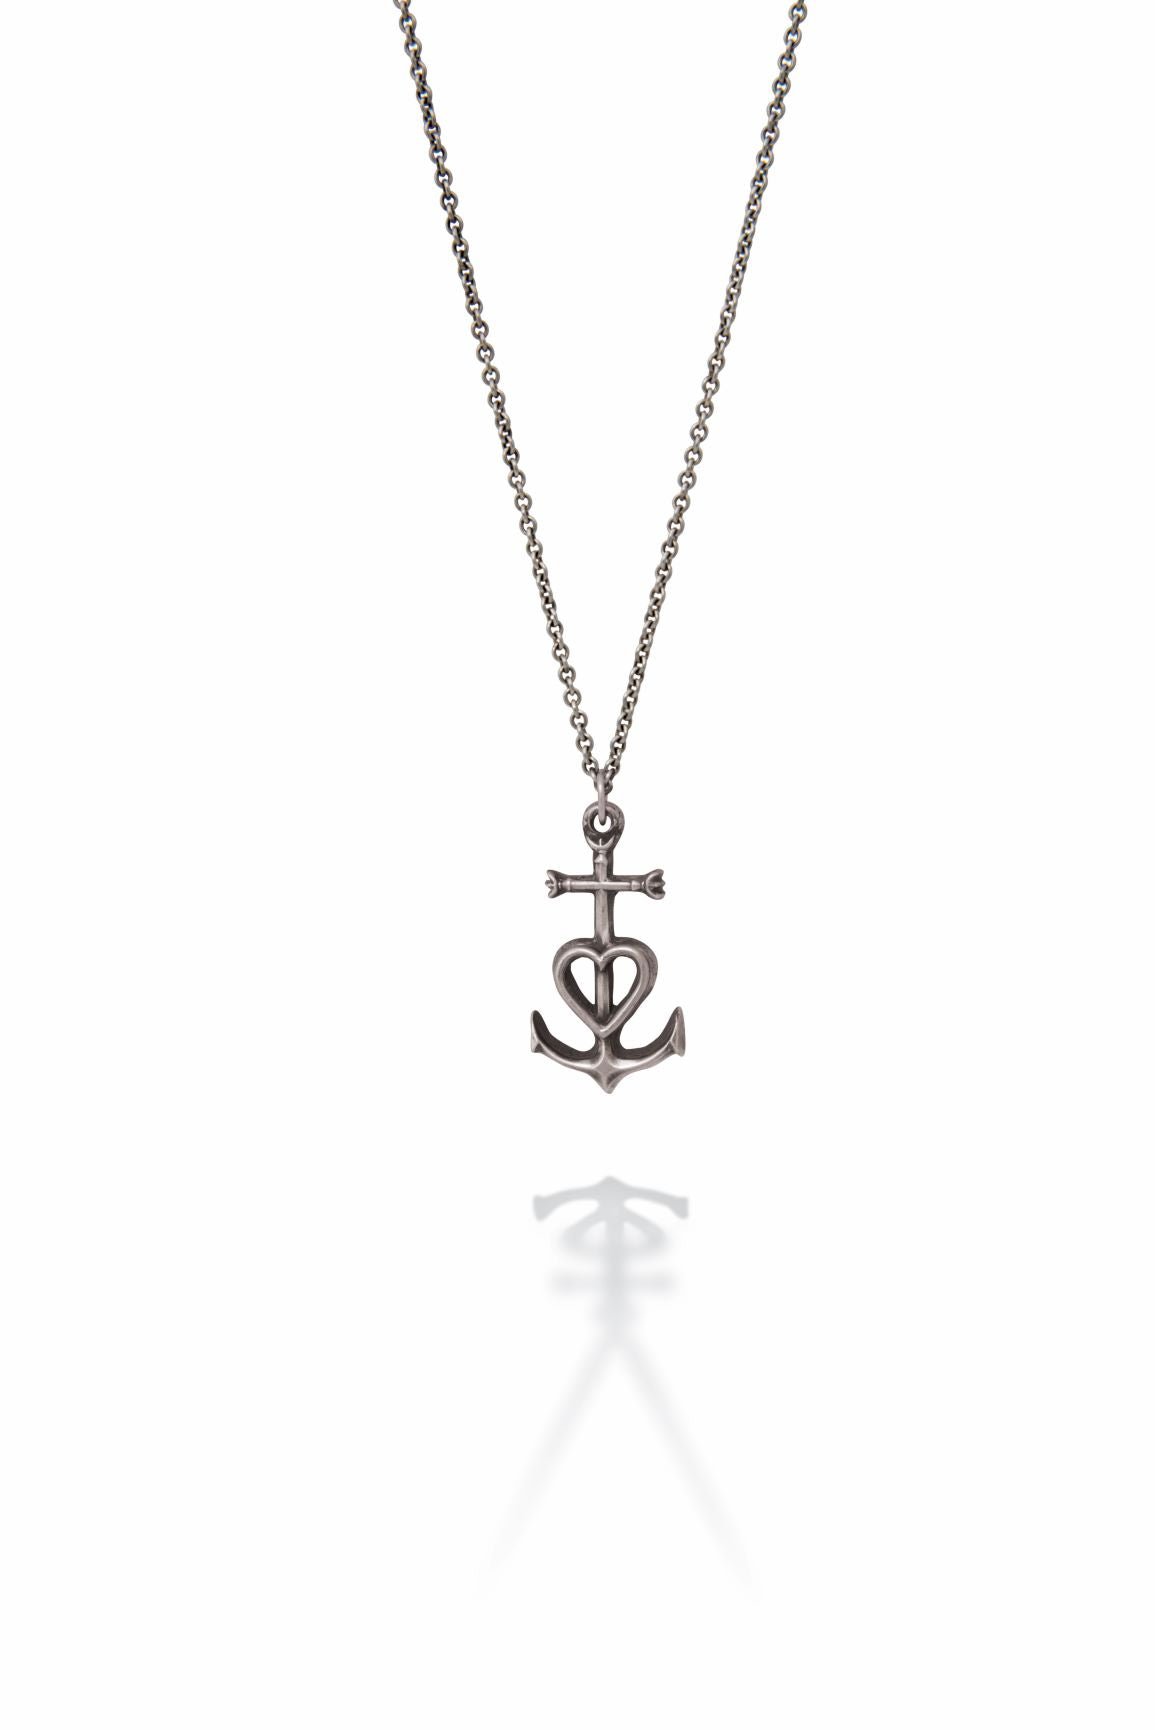 The Jewel Shop - Faith Hope and Charity⠀⠀⠀⠀⠀⠀⠀⠀⠀ The cross, signifying Faith,  while a sea anchor, symbolizes Hope and the heart representing Love 💕 💫  ⠀⠀⠀⠀⠀⠀⠀⠀⠀ ⠀⠀⠀⠀⠀⠀⠀⠀⠀ 💎High quality jewellery at Affordable